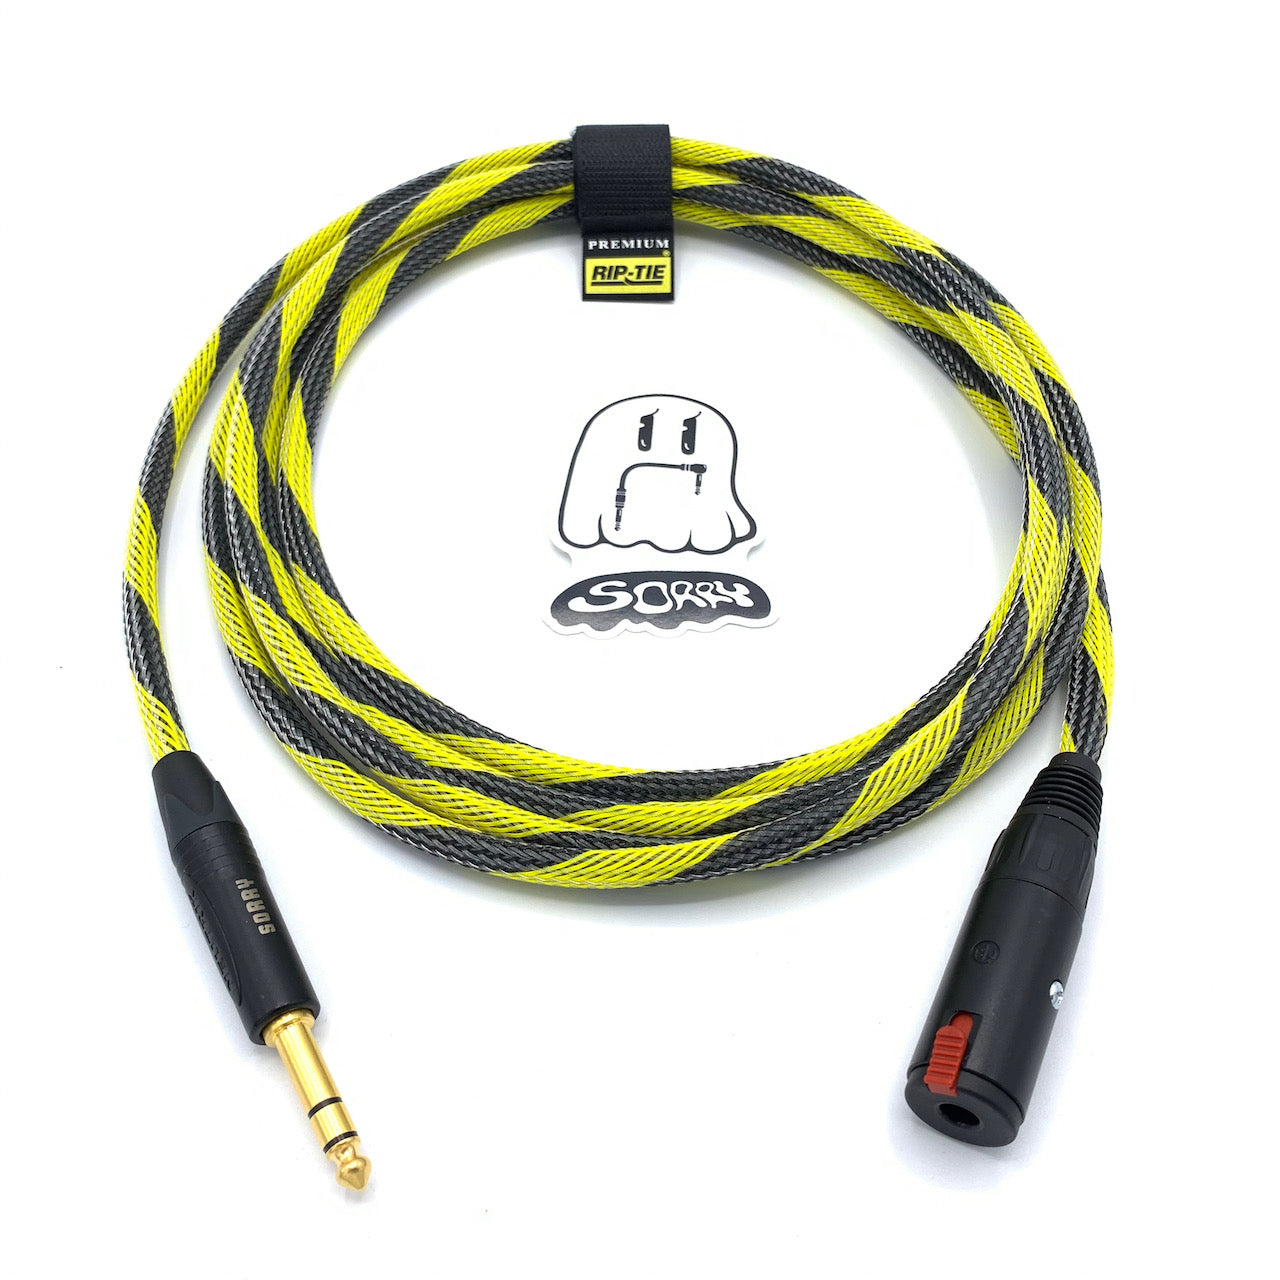 SORRY Locking Headphone Extension Cable - Bumble Bee